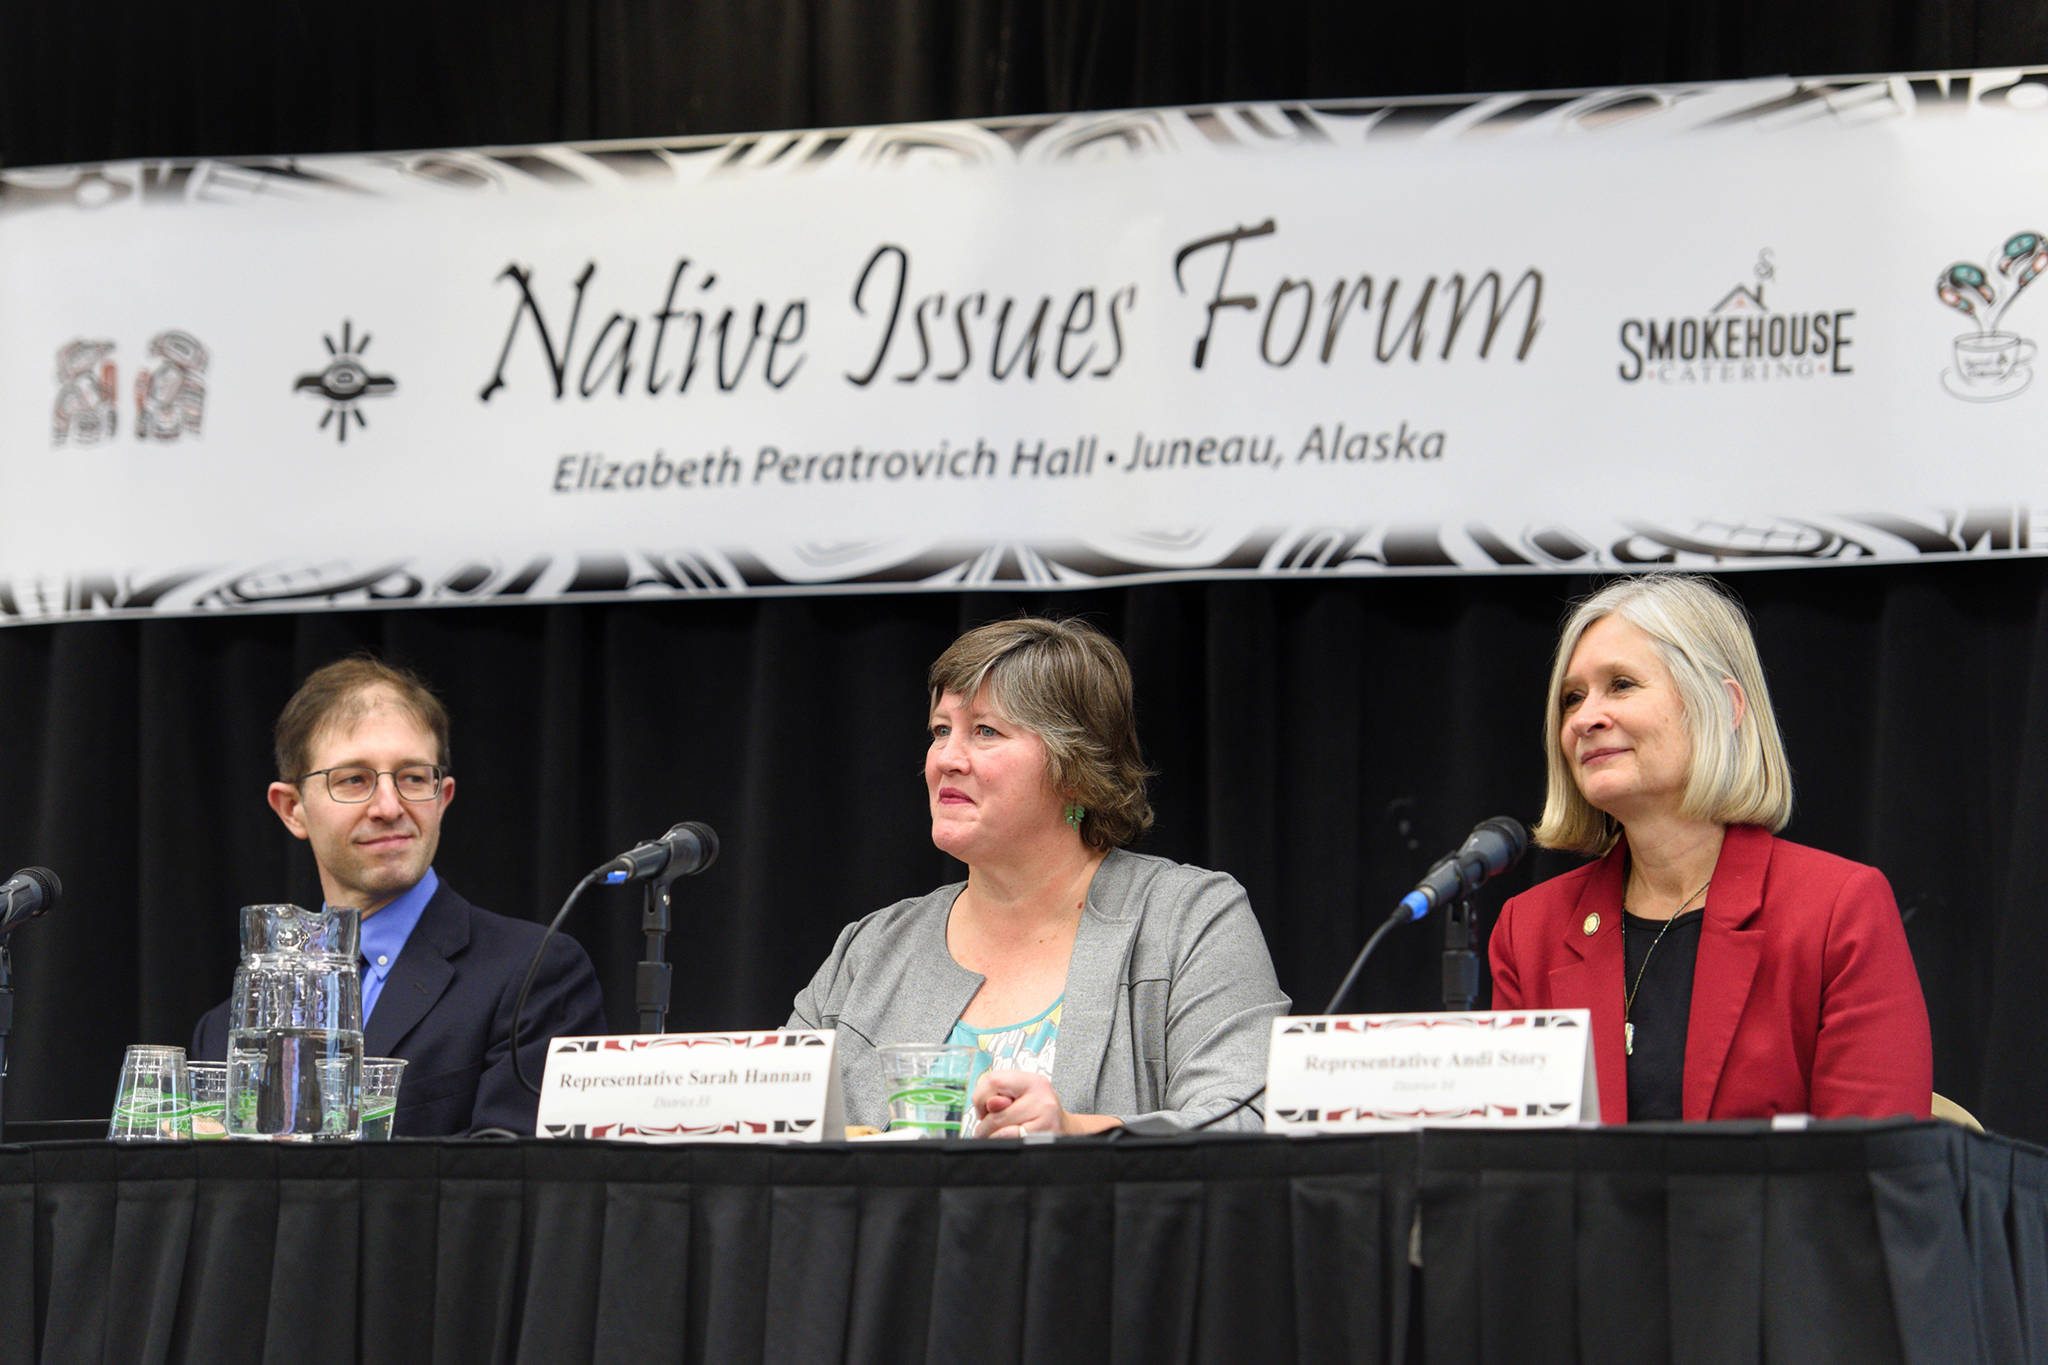 Sen. Jesse Kiehl, D-Juneau, left, Rep. Sara Hannan, D-Juneau, center, and Rep. Andi Story, D-Juneau, are introduced at the Native Issues Forum at the Elizabeth Peratrovich Hall on Wednesday,Jan. 23, 2019. (Michael Penn | Juneau Empire)